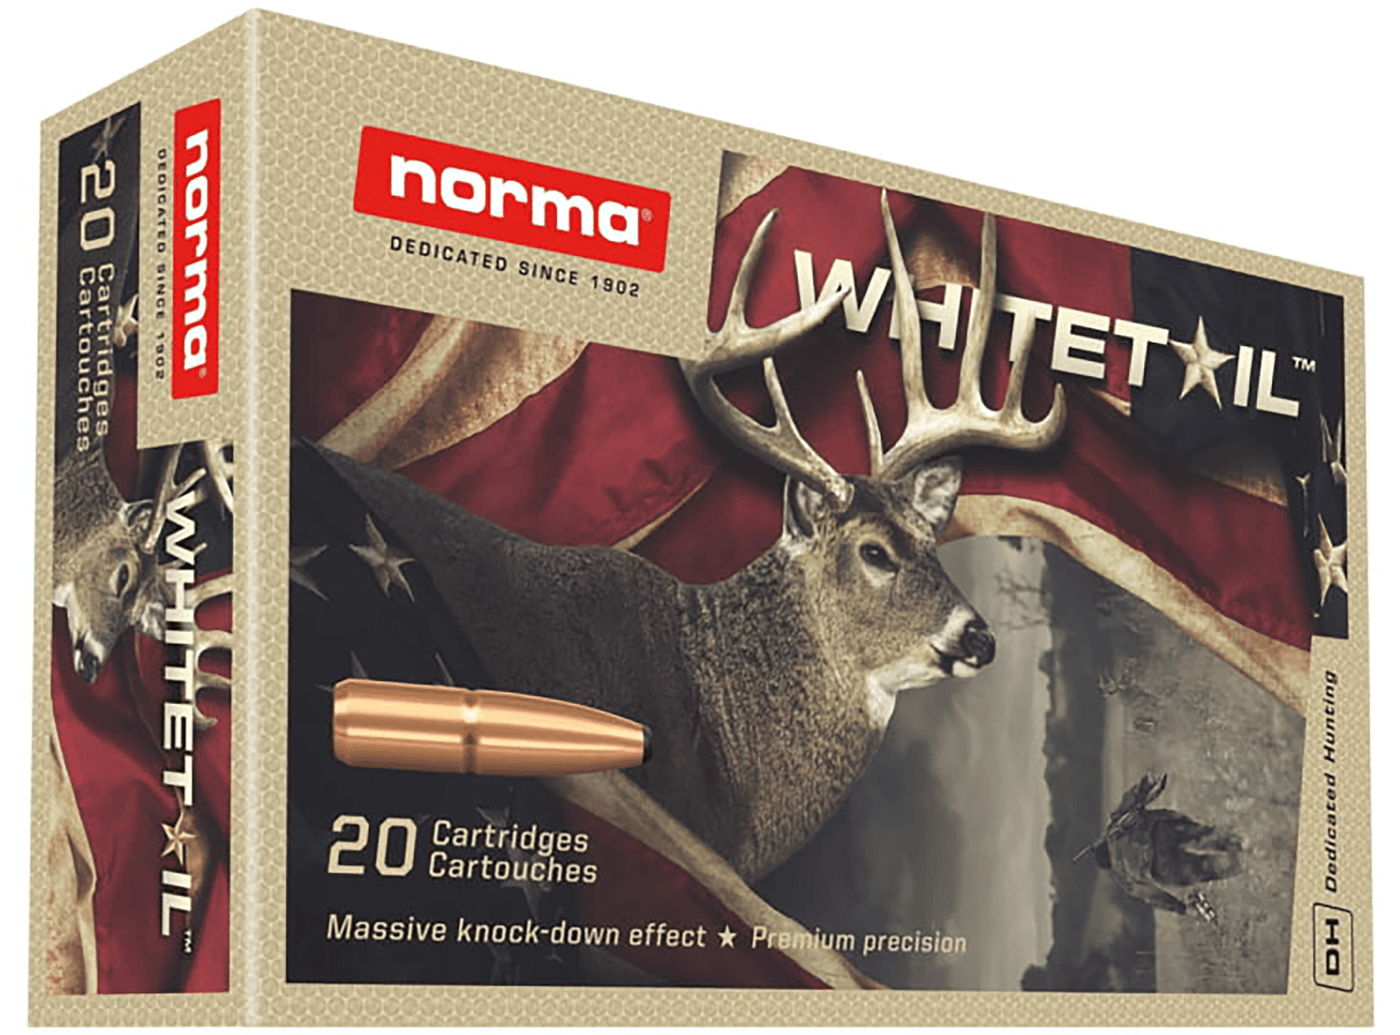 NORMA AMMUNITION (RUAG) Norma Ammunition (ruag) Whitetail, Norma 20177382 308 Win 150gr Psp  Whitetail  20/10 Ammo